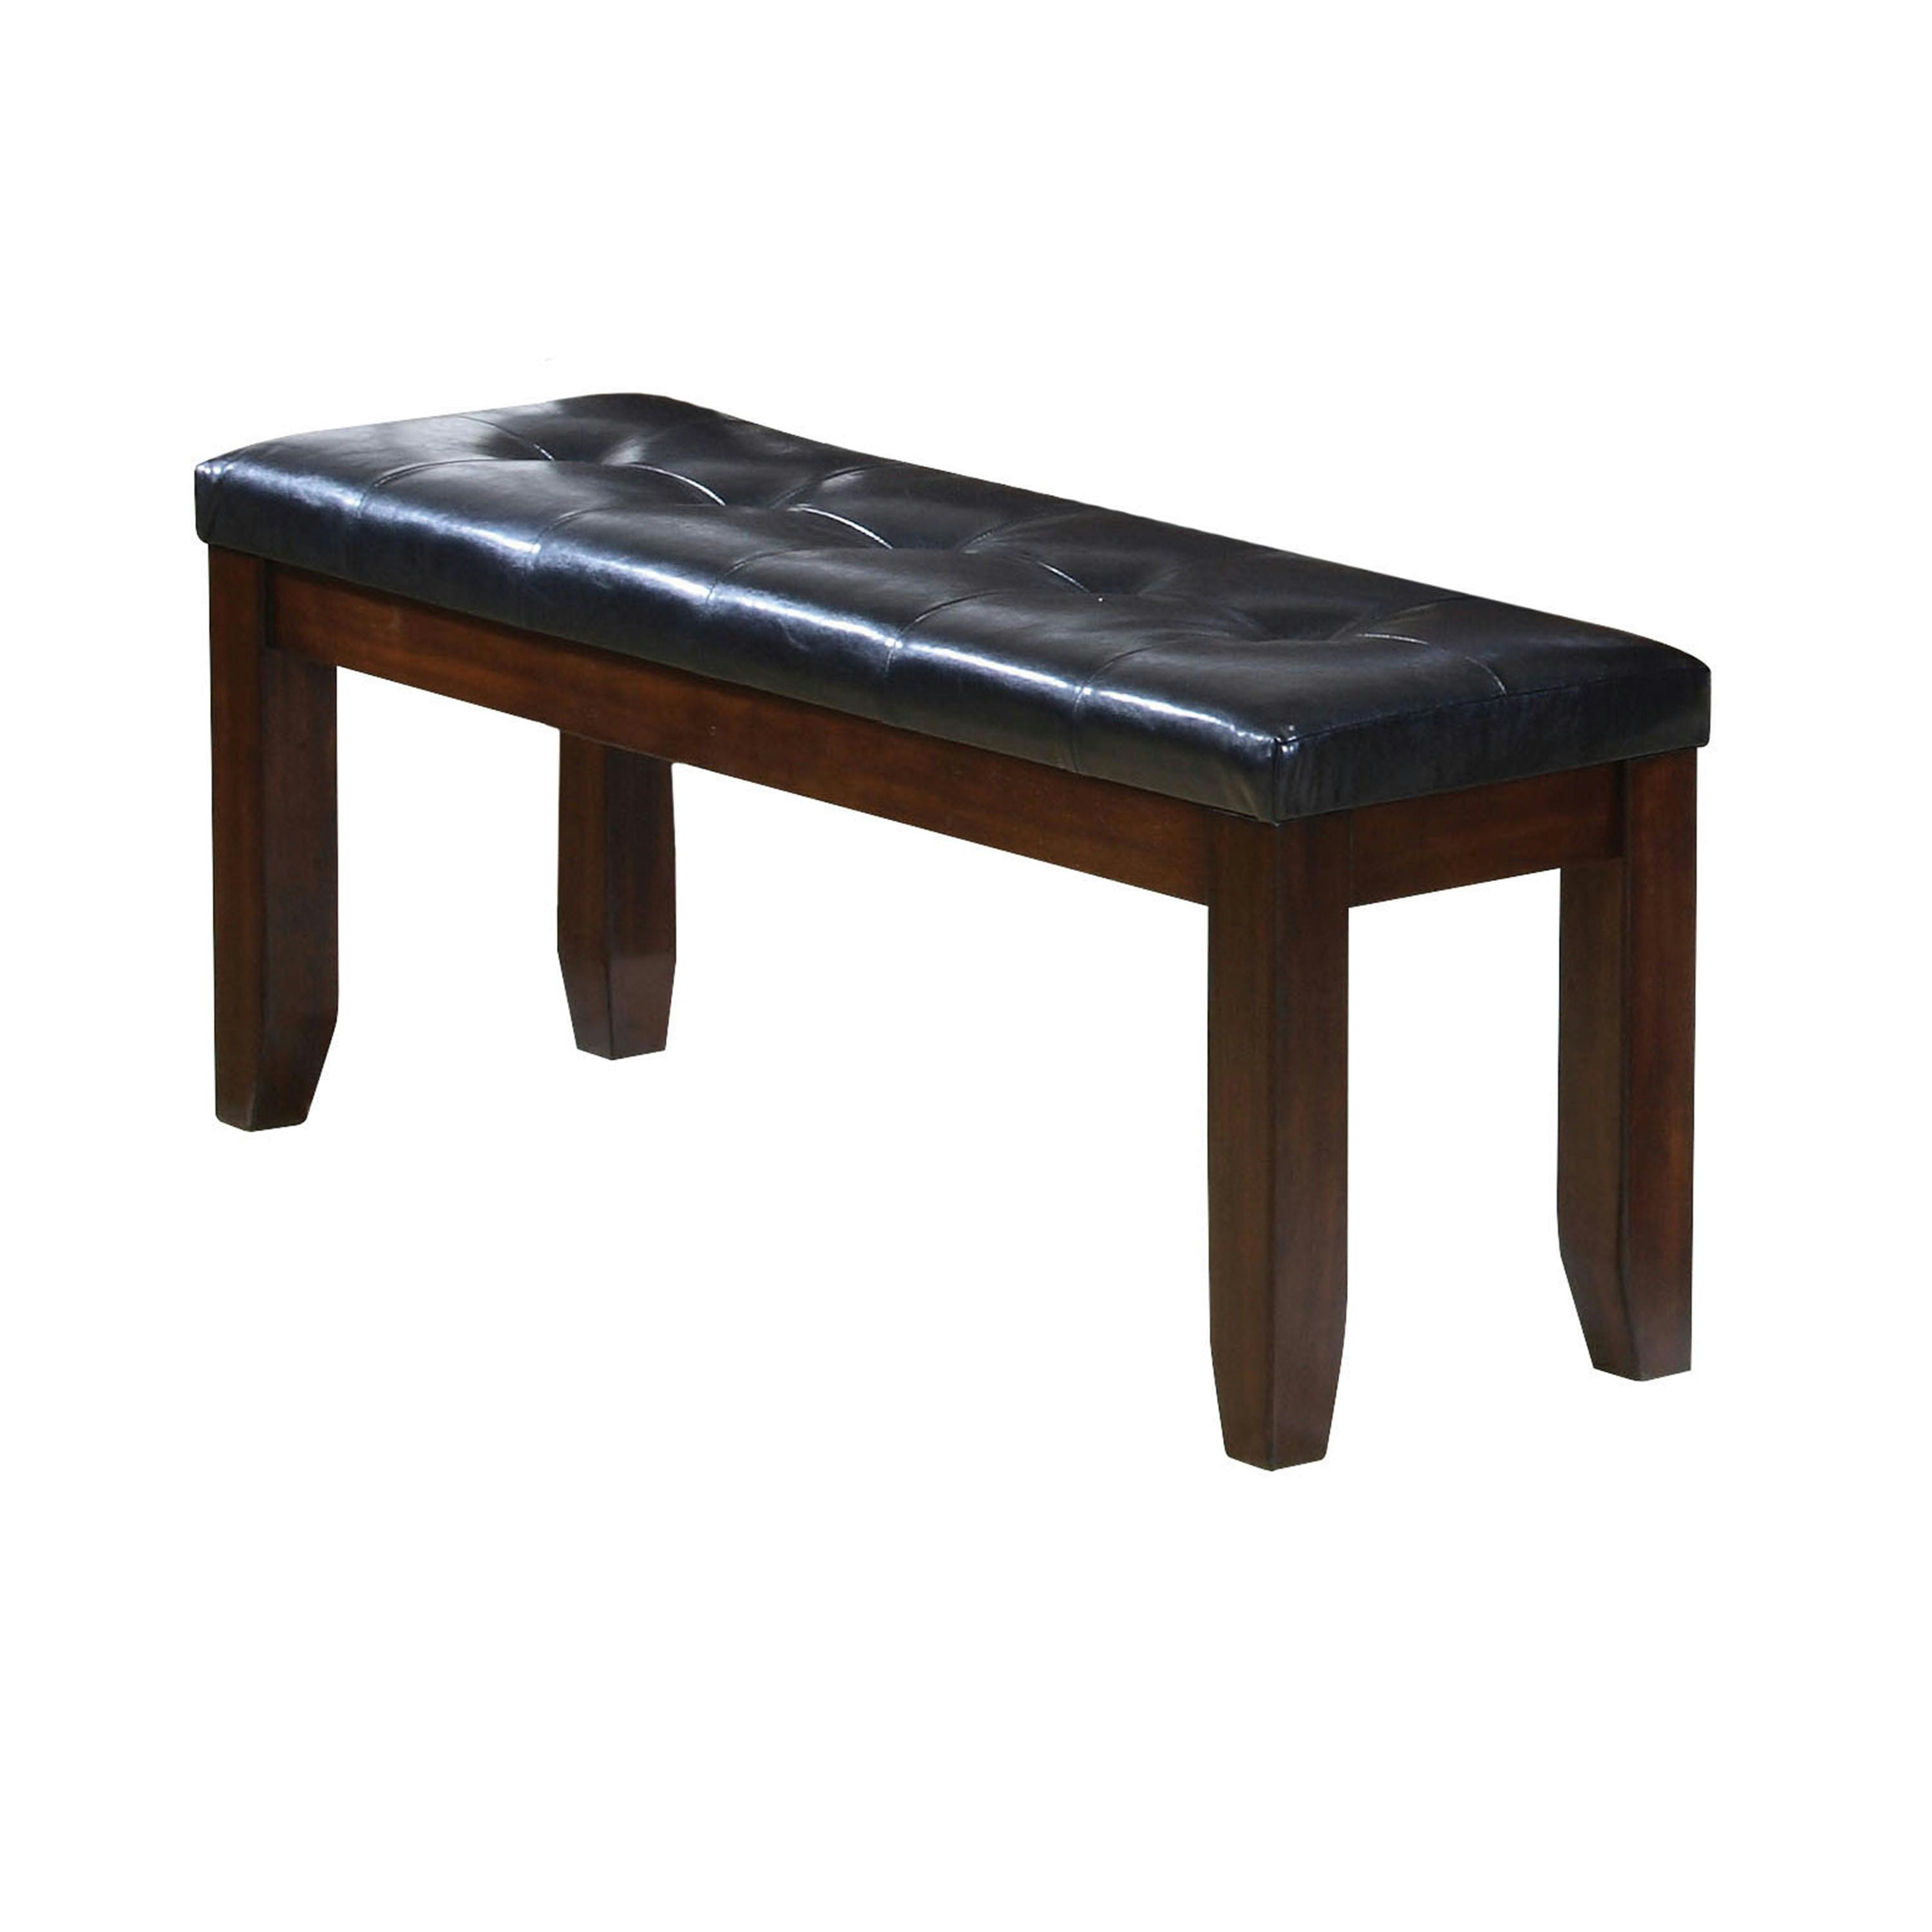 Espresso Brown and Black Leather Tufted Dining Bench, 48"